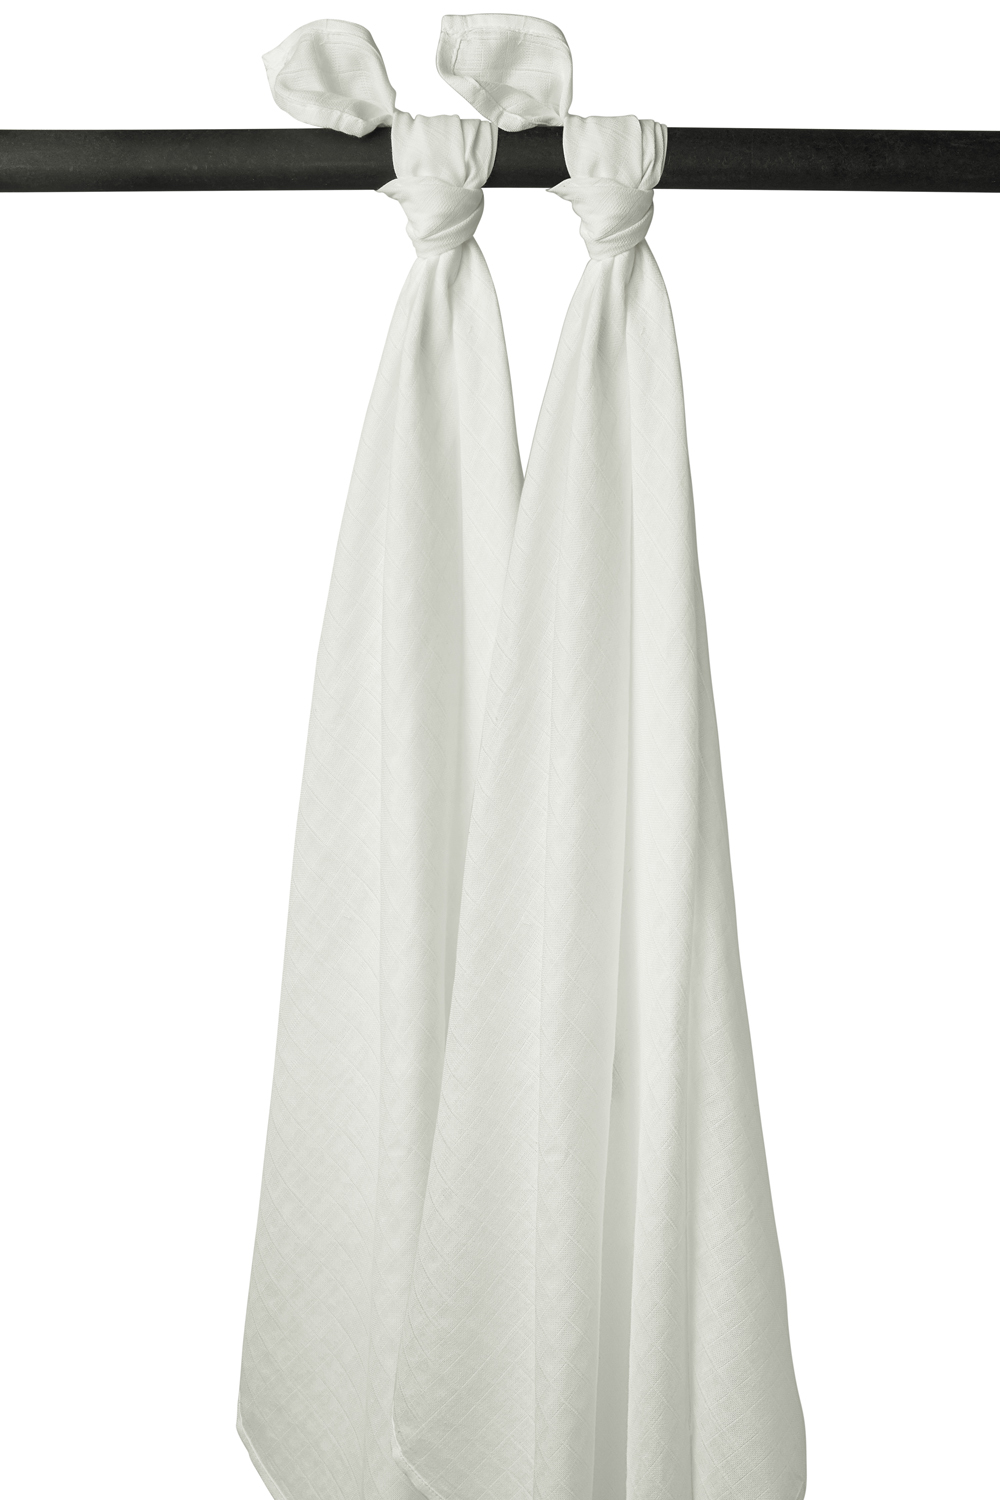 Swaddle  2er pack musselin Uni - offwhite - 120x120cm